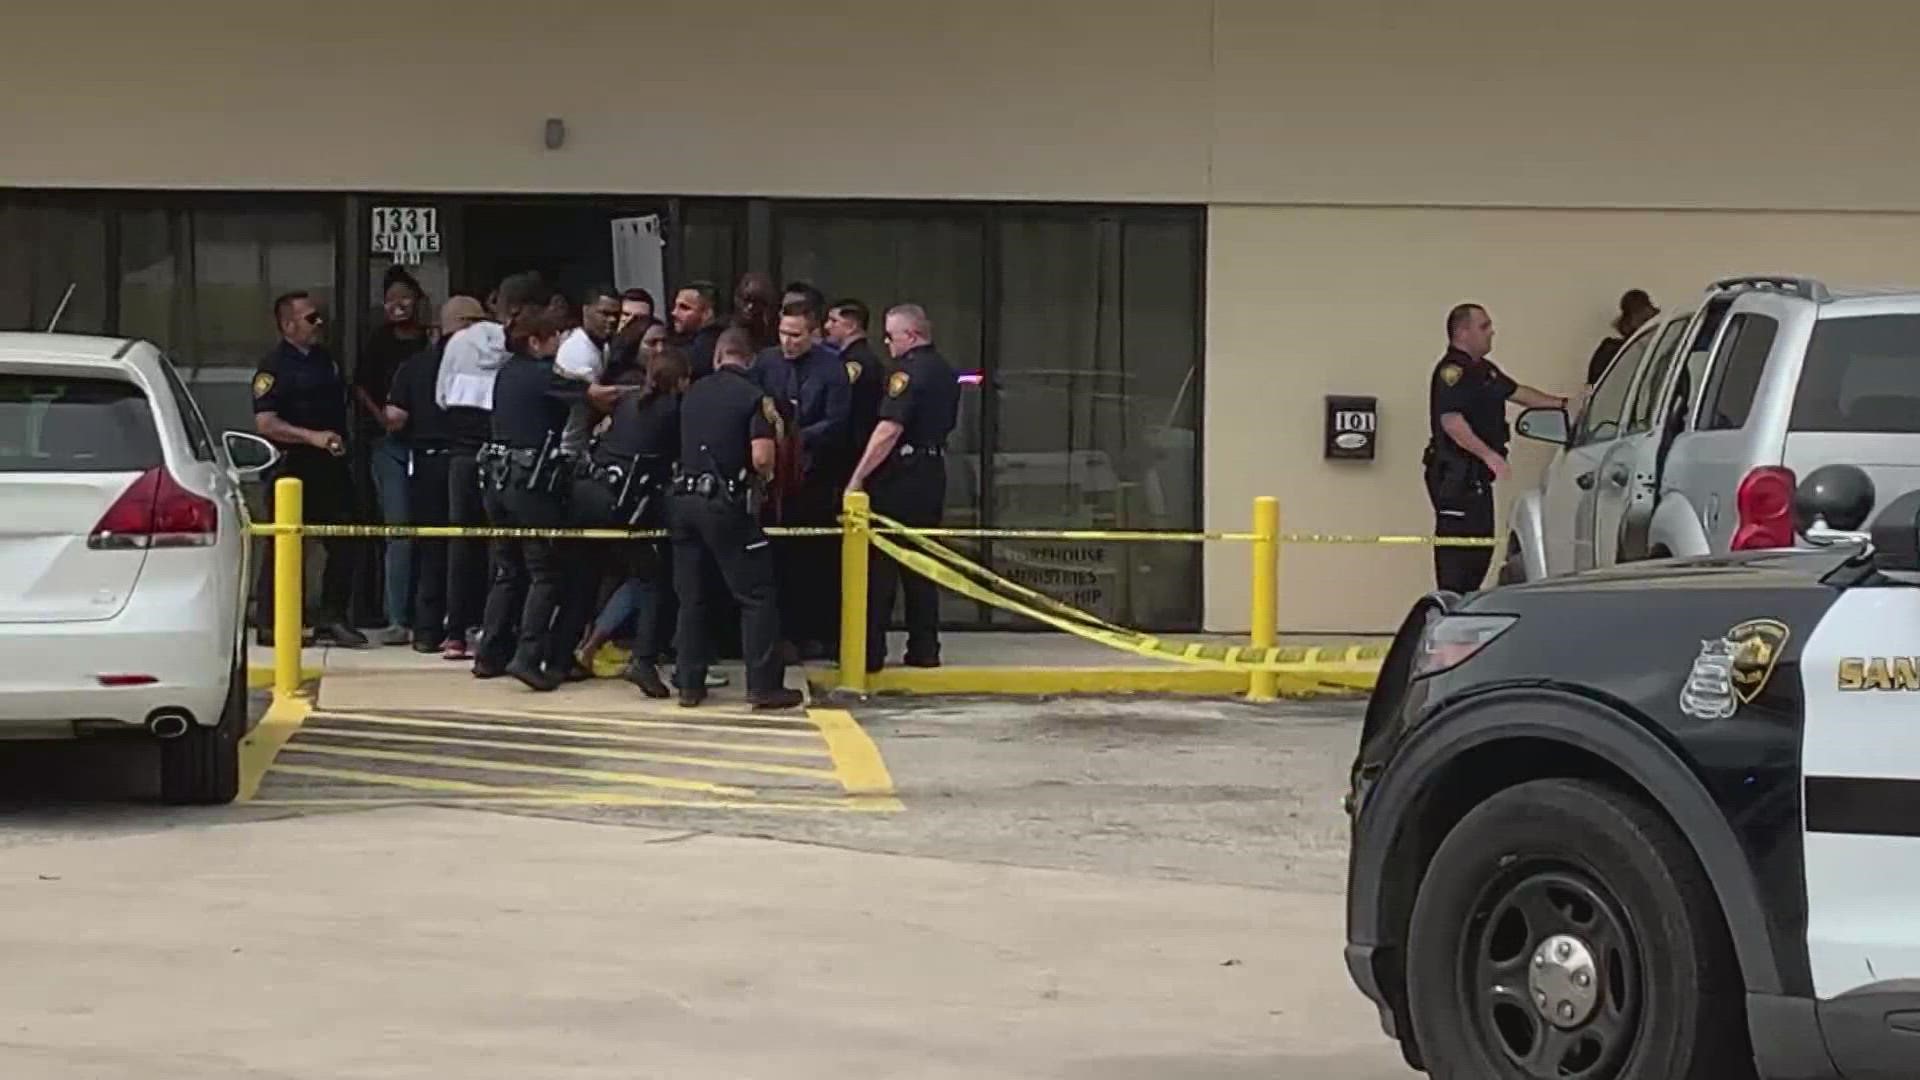 As he was getting out of the car, a gunman approached the vehicle and opened fire on the man, according to SAPD.